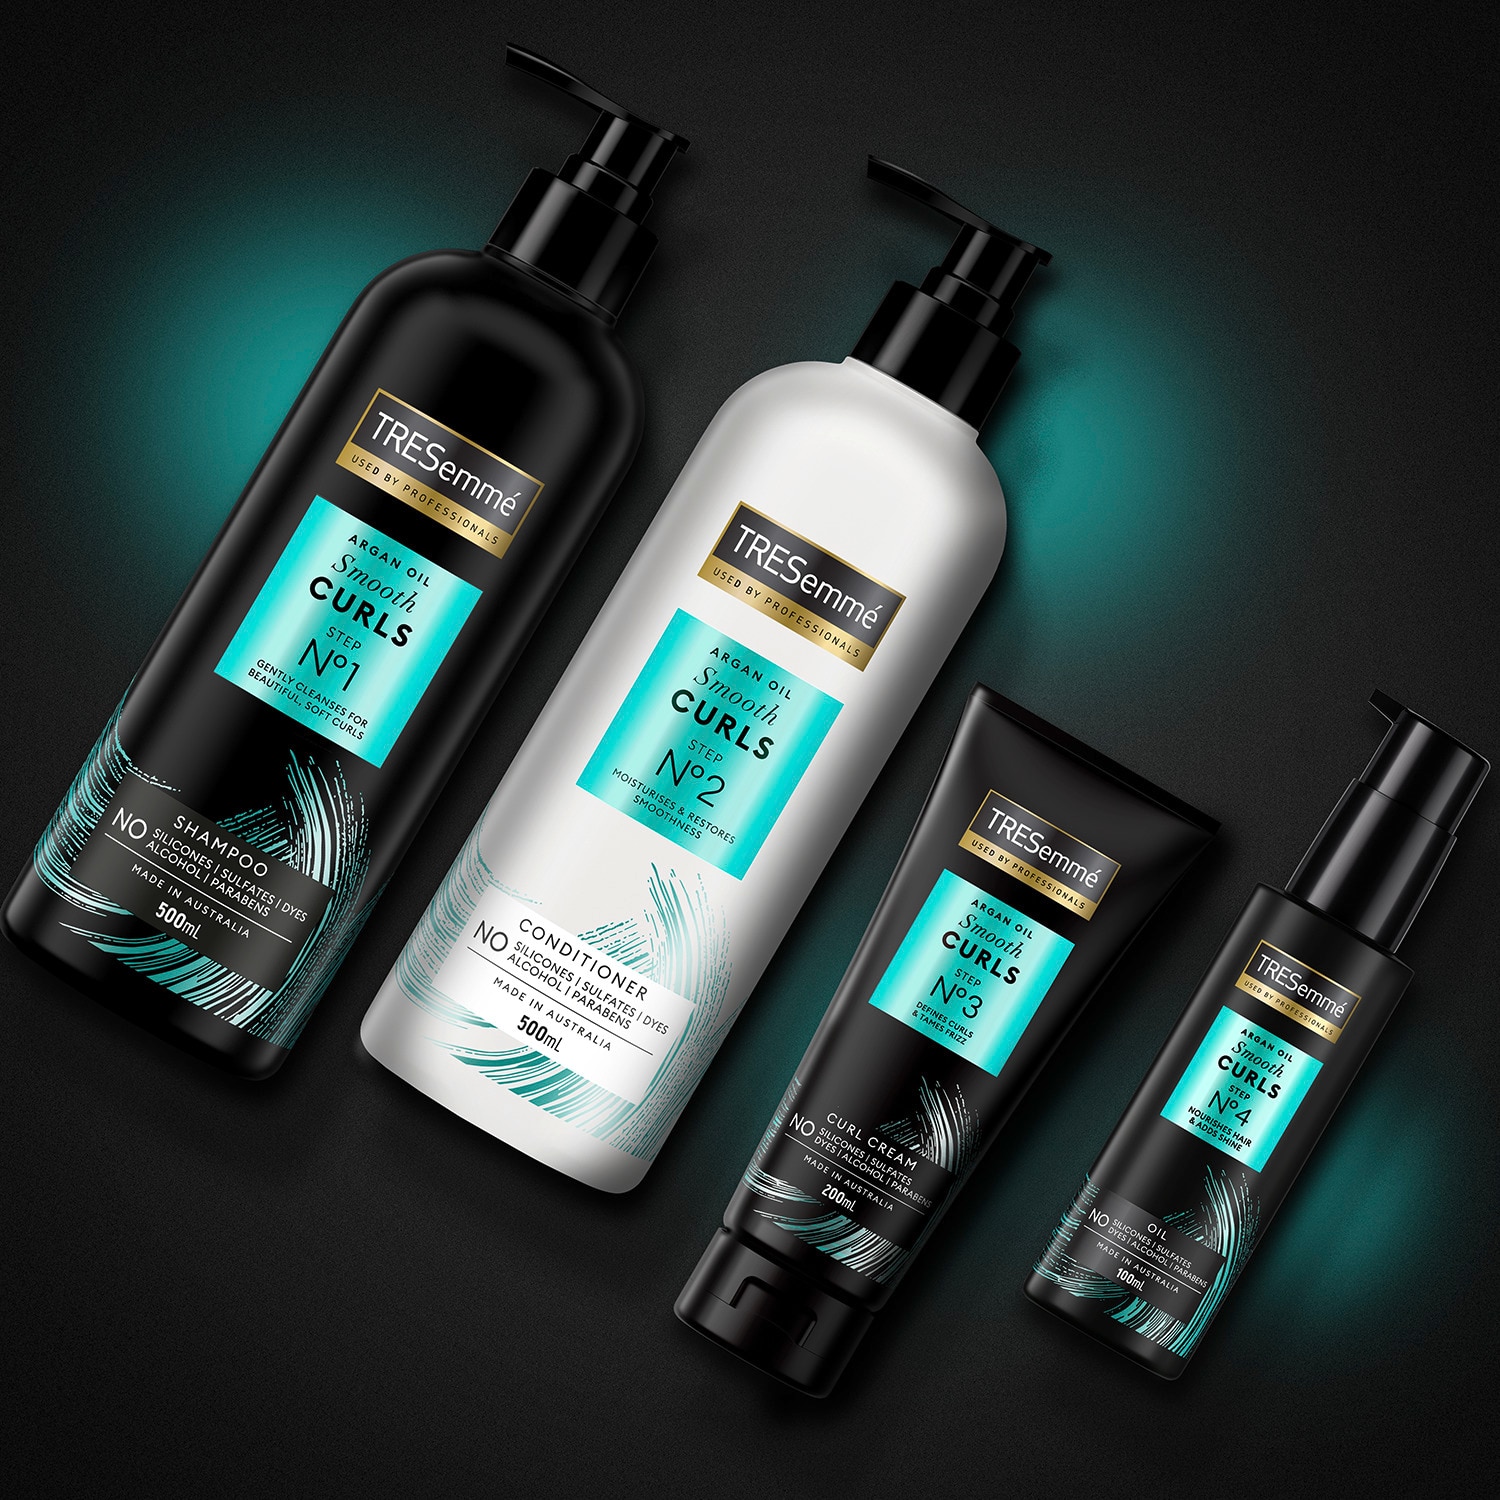 Product shot of TRESemmé Smooth Curls shampoo, conditioner, cream and oil